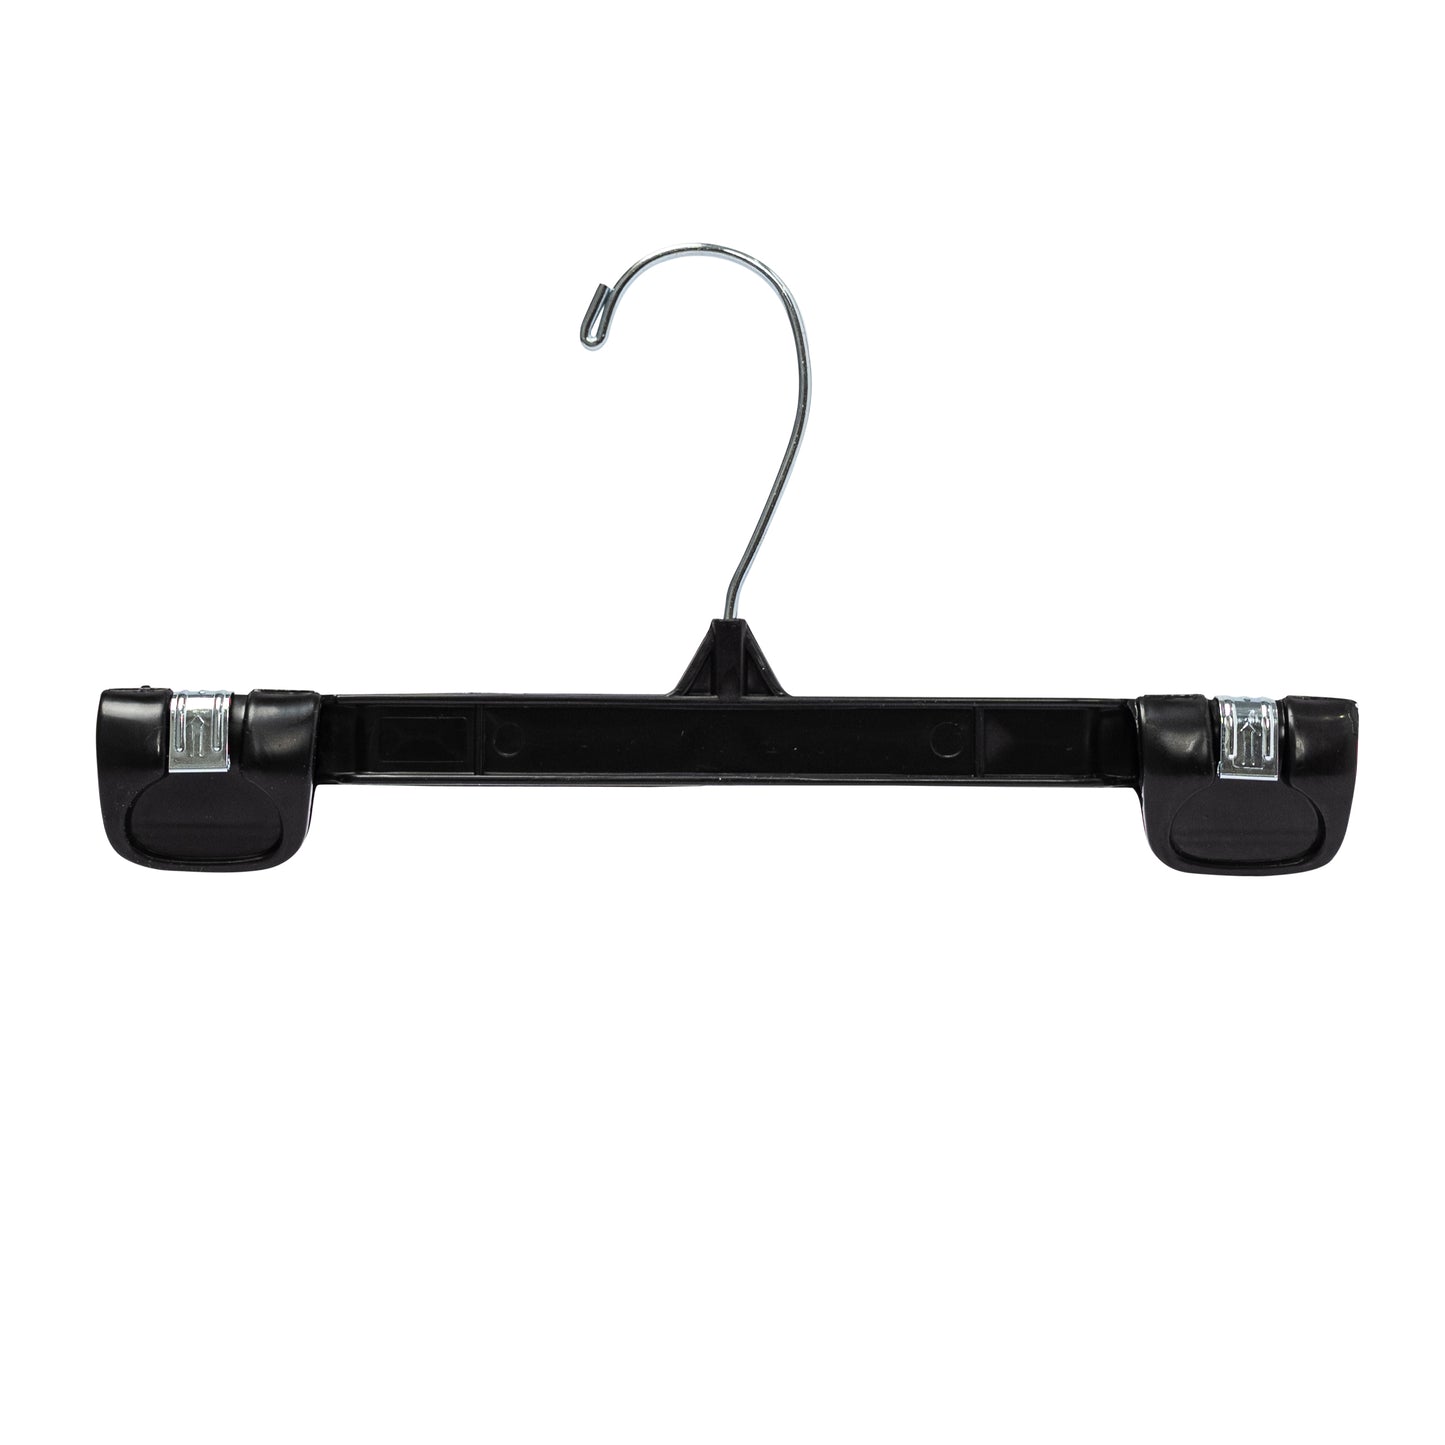 25cm Pant Hanger with Large Clips Sold in Bundle of 25/50/100